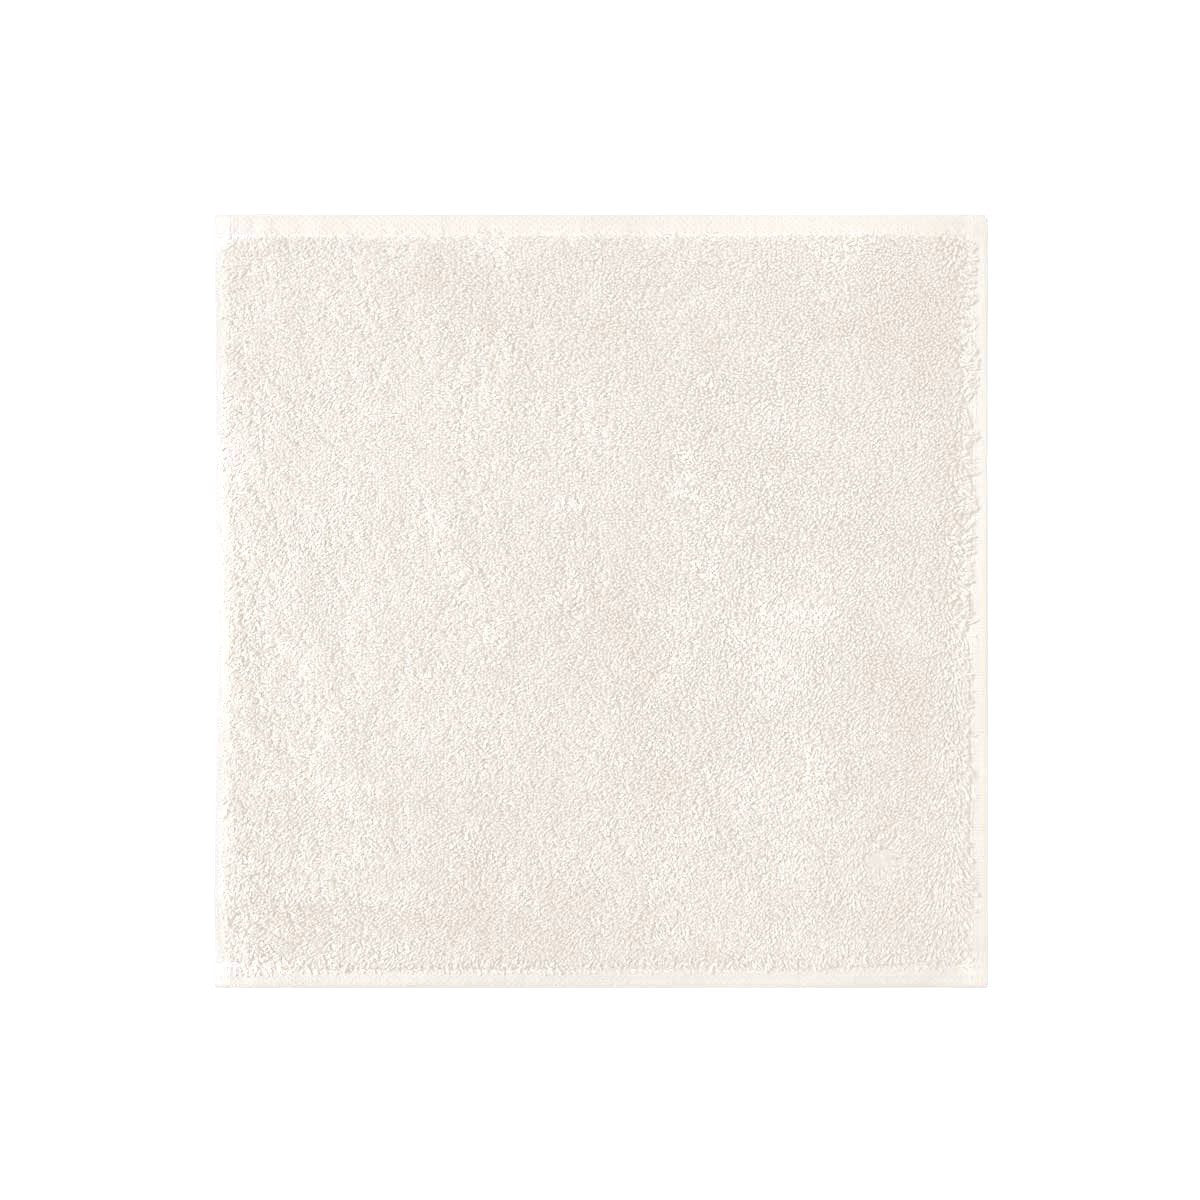 Etoile Nacre Bath Collection by Yves Delorme | Fig Linens - Ivory bath linen, wash cloth